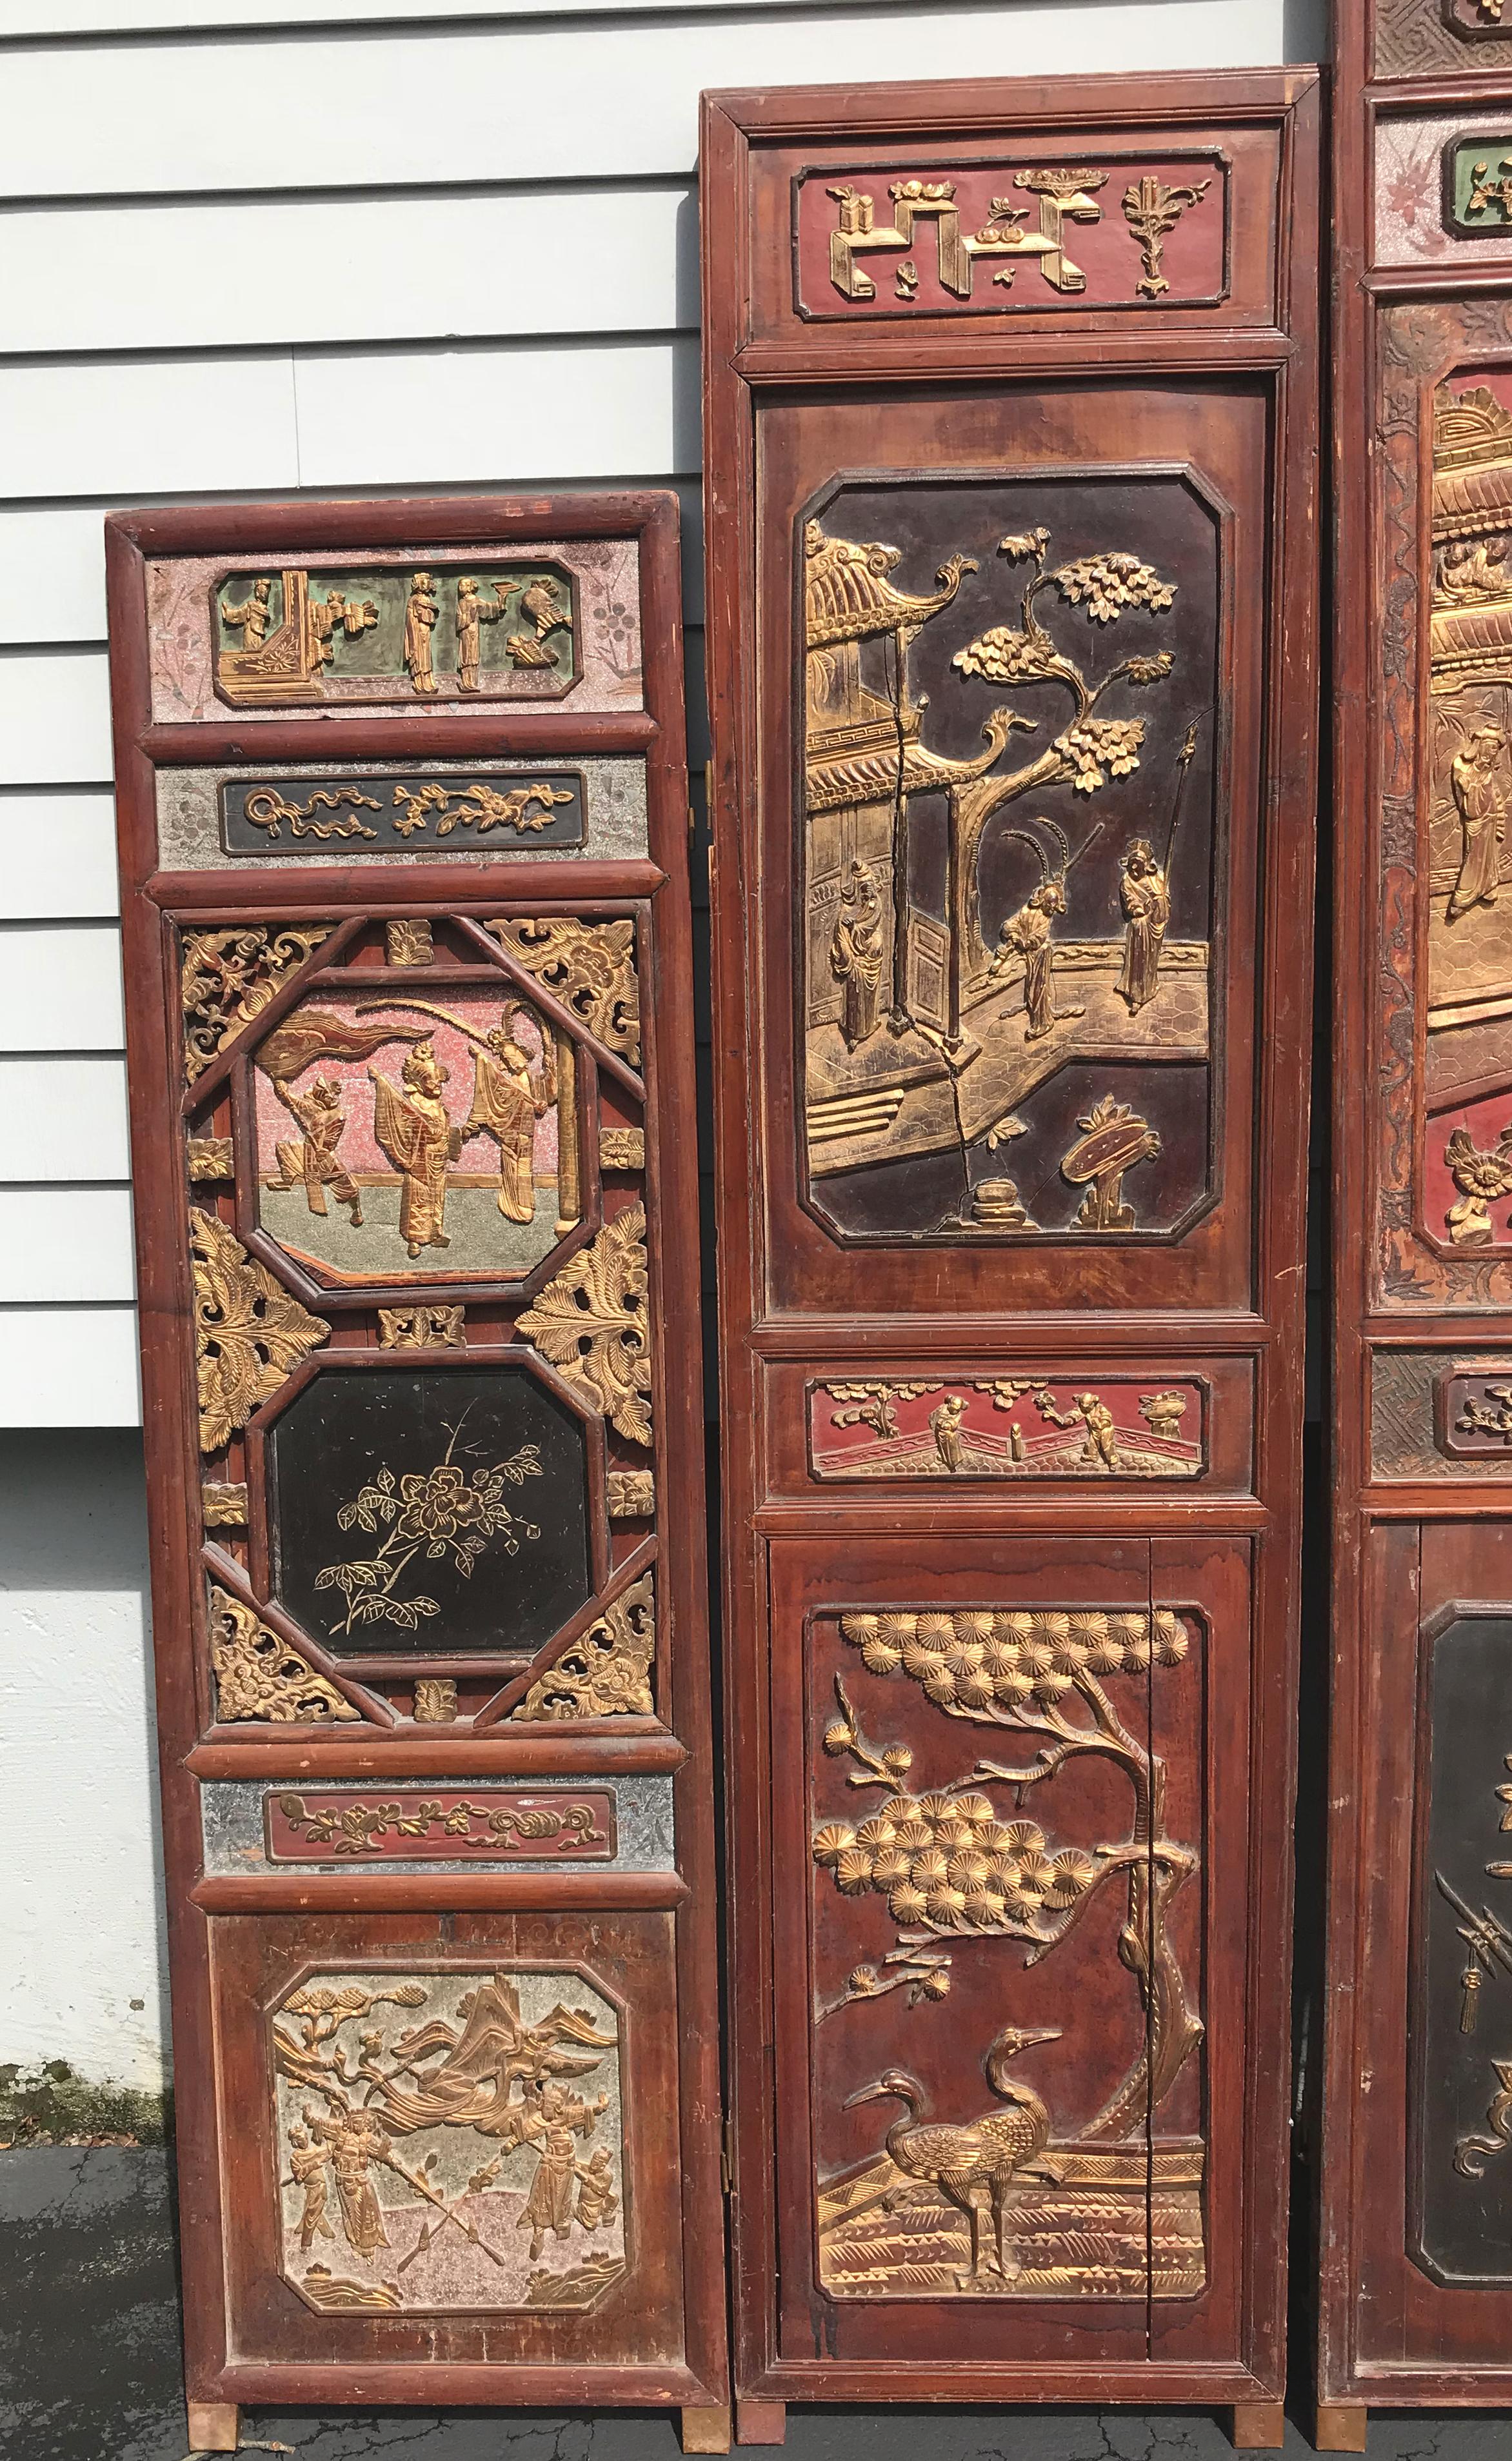 An assembled decorative six-panel carved Chinese wooden dressing screen with polychrome and gilt decoration, each panel depicting various folklore scenes, trees, and animals, with graduated sizes and brass hinge hardware, dating to the late 19th or